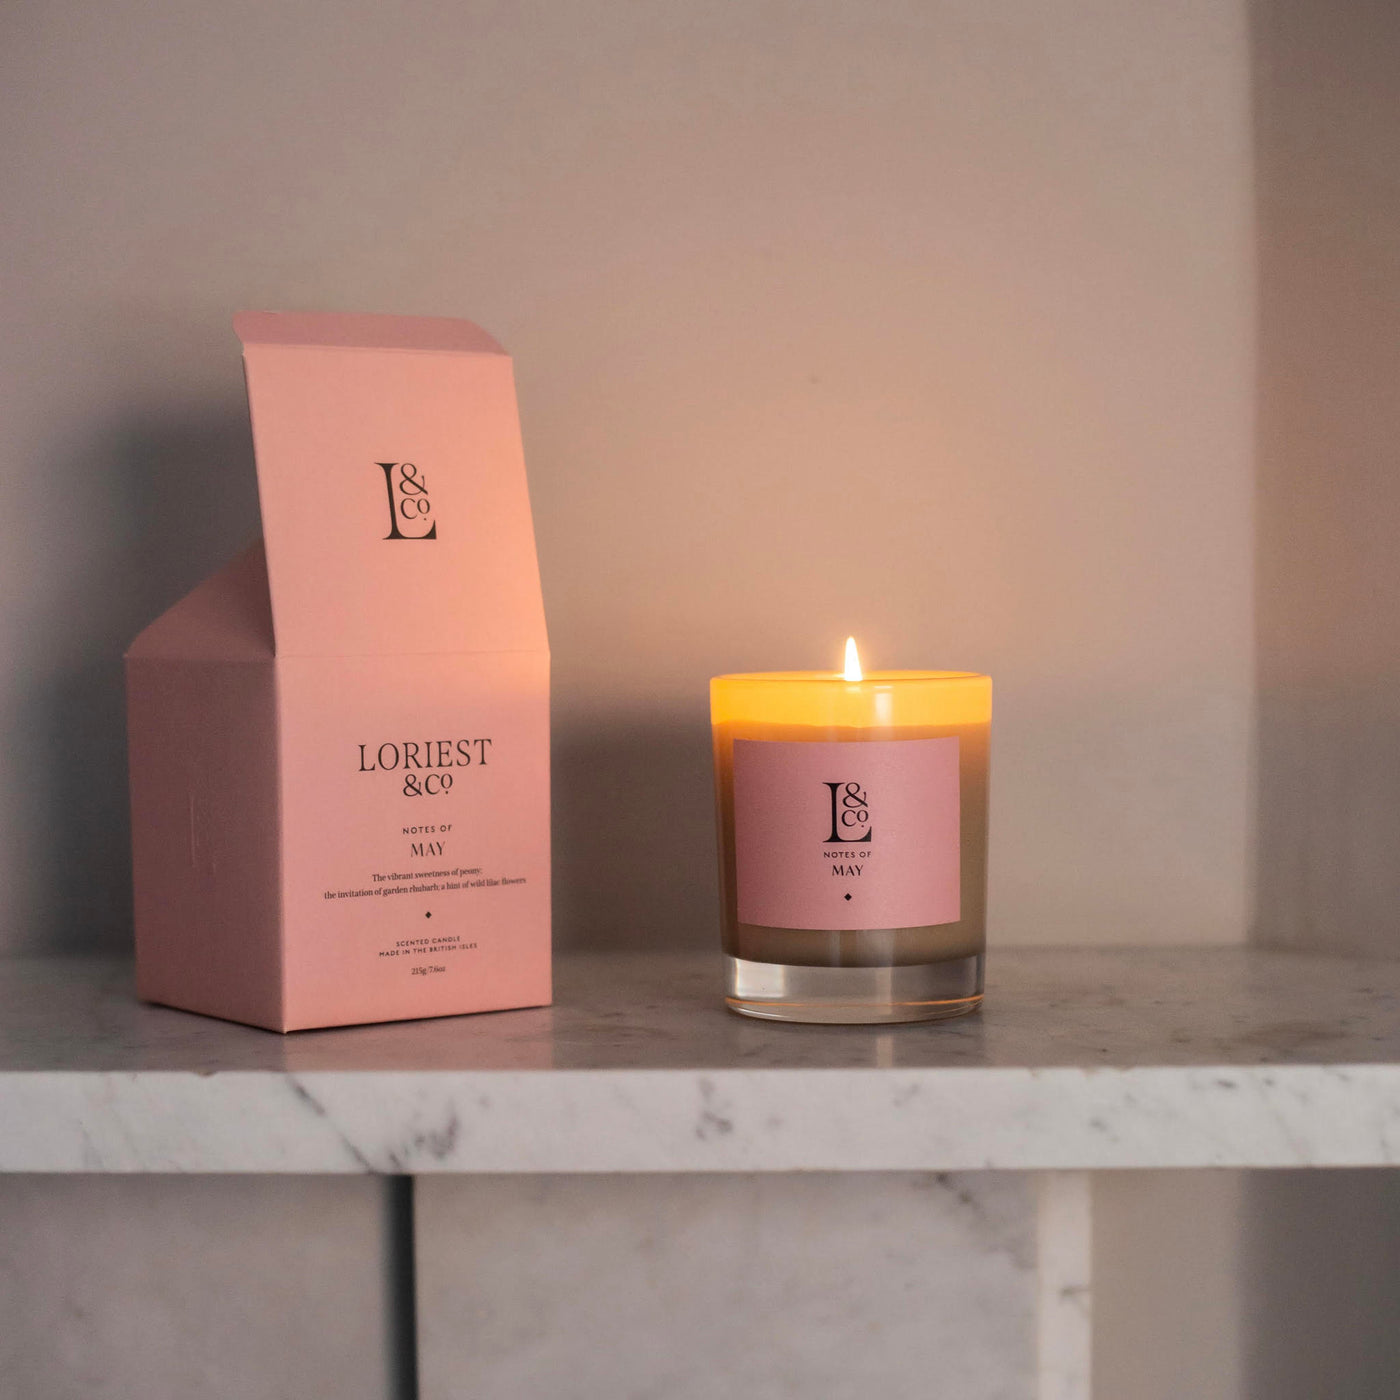 Loriest luxury scented candle Notes of May brings the scent of an early summer garden into your home. Notes of peony, lilac and rhubarb are combined with a sustainable plant based wax. Up to 60 hours burn time. Hand-poured in England.